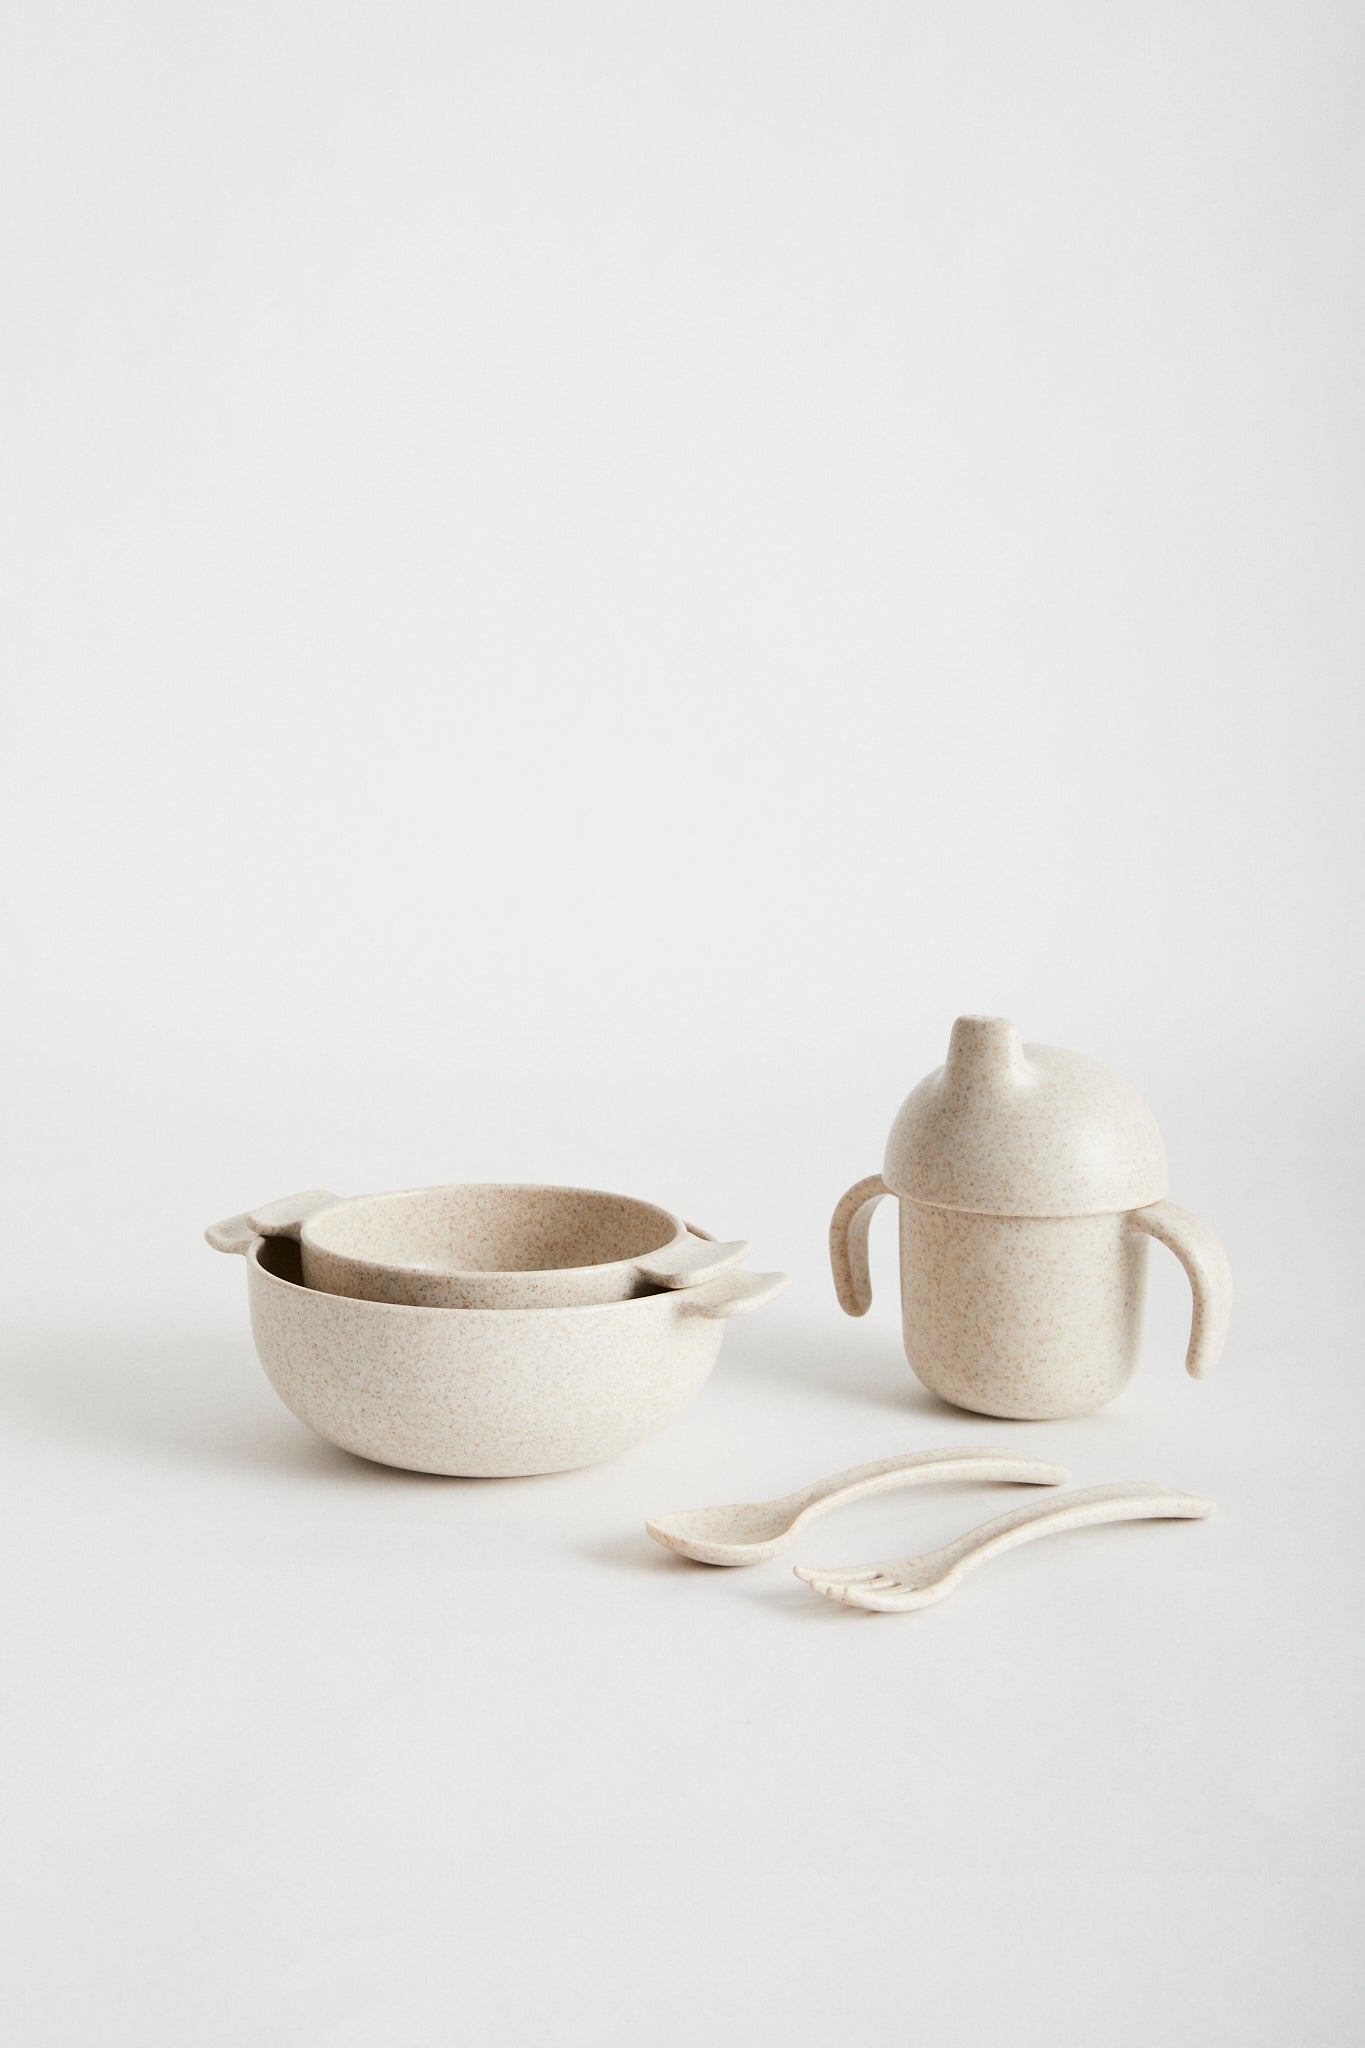 Wheat straw dinnerware set in Oat, -Set contains: sippy cup, large bowl, small bowl, spoon & fork